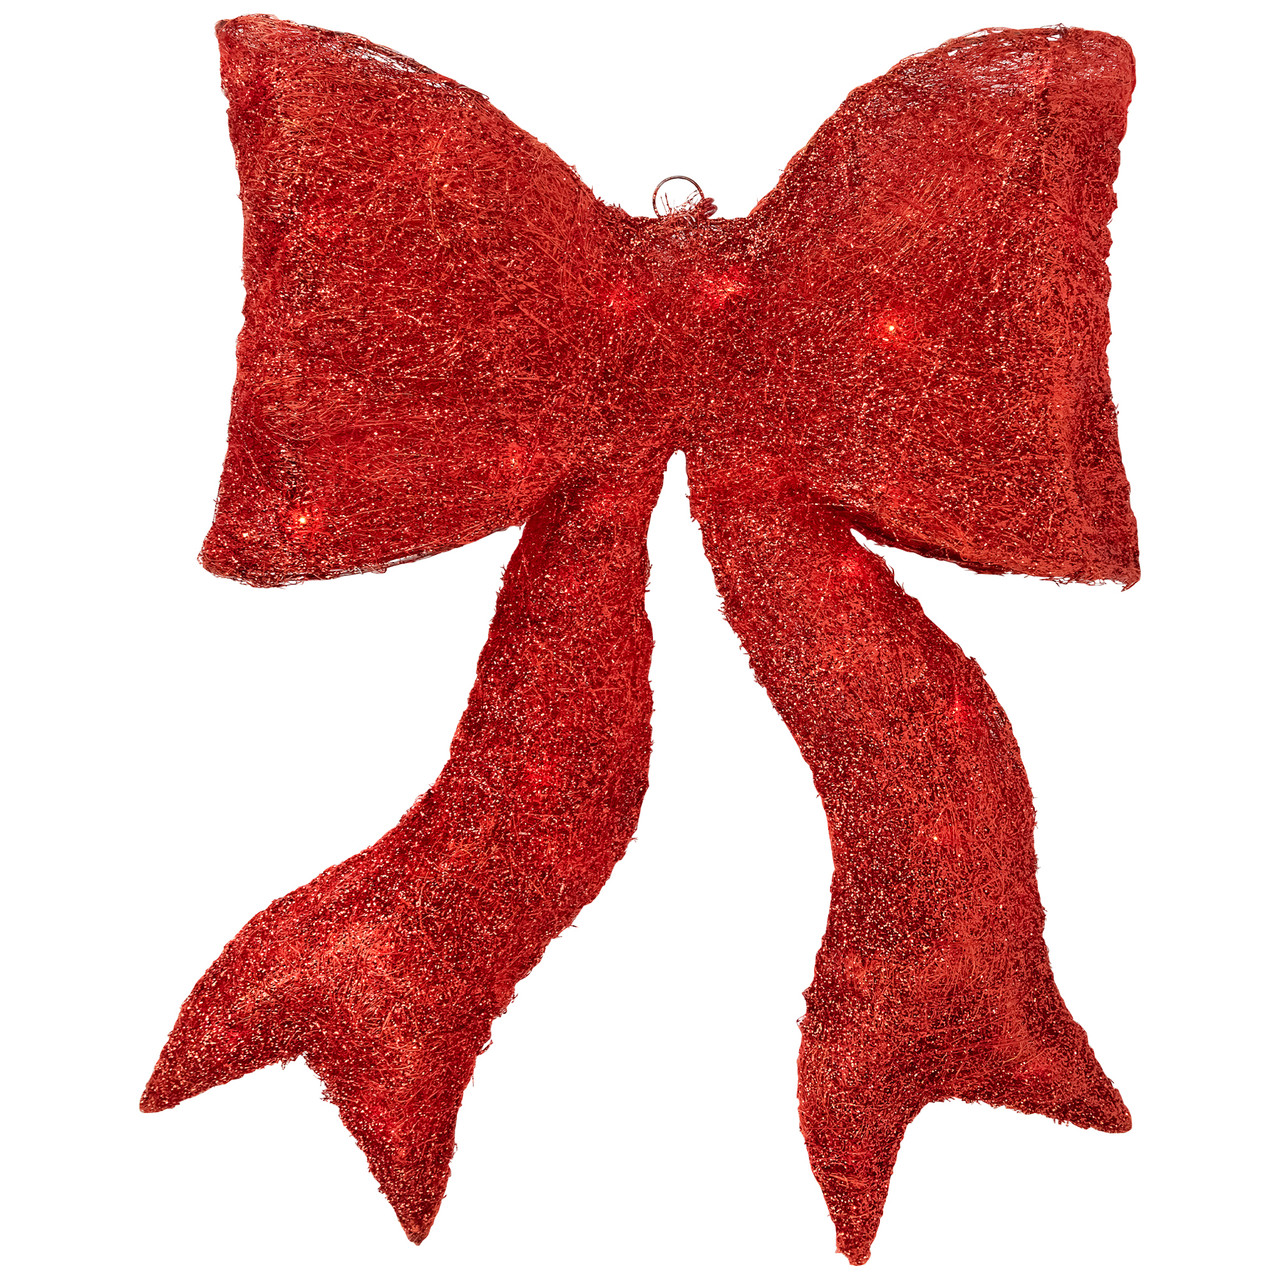 Double dark red decorative bow. Fabric red ribbon, object of tied